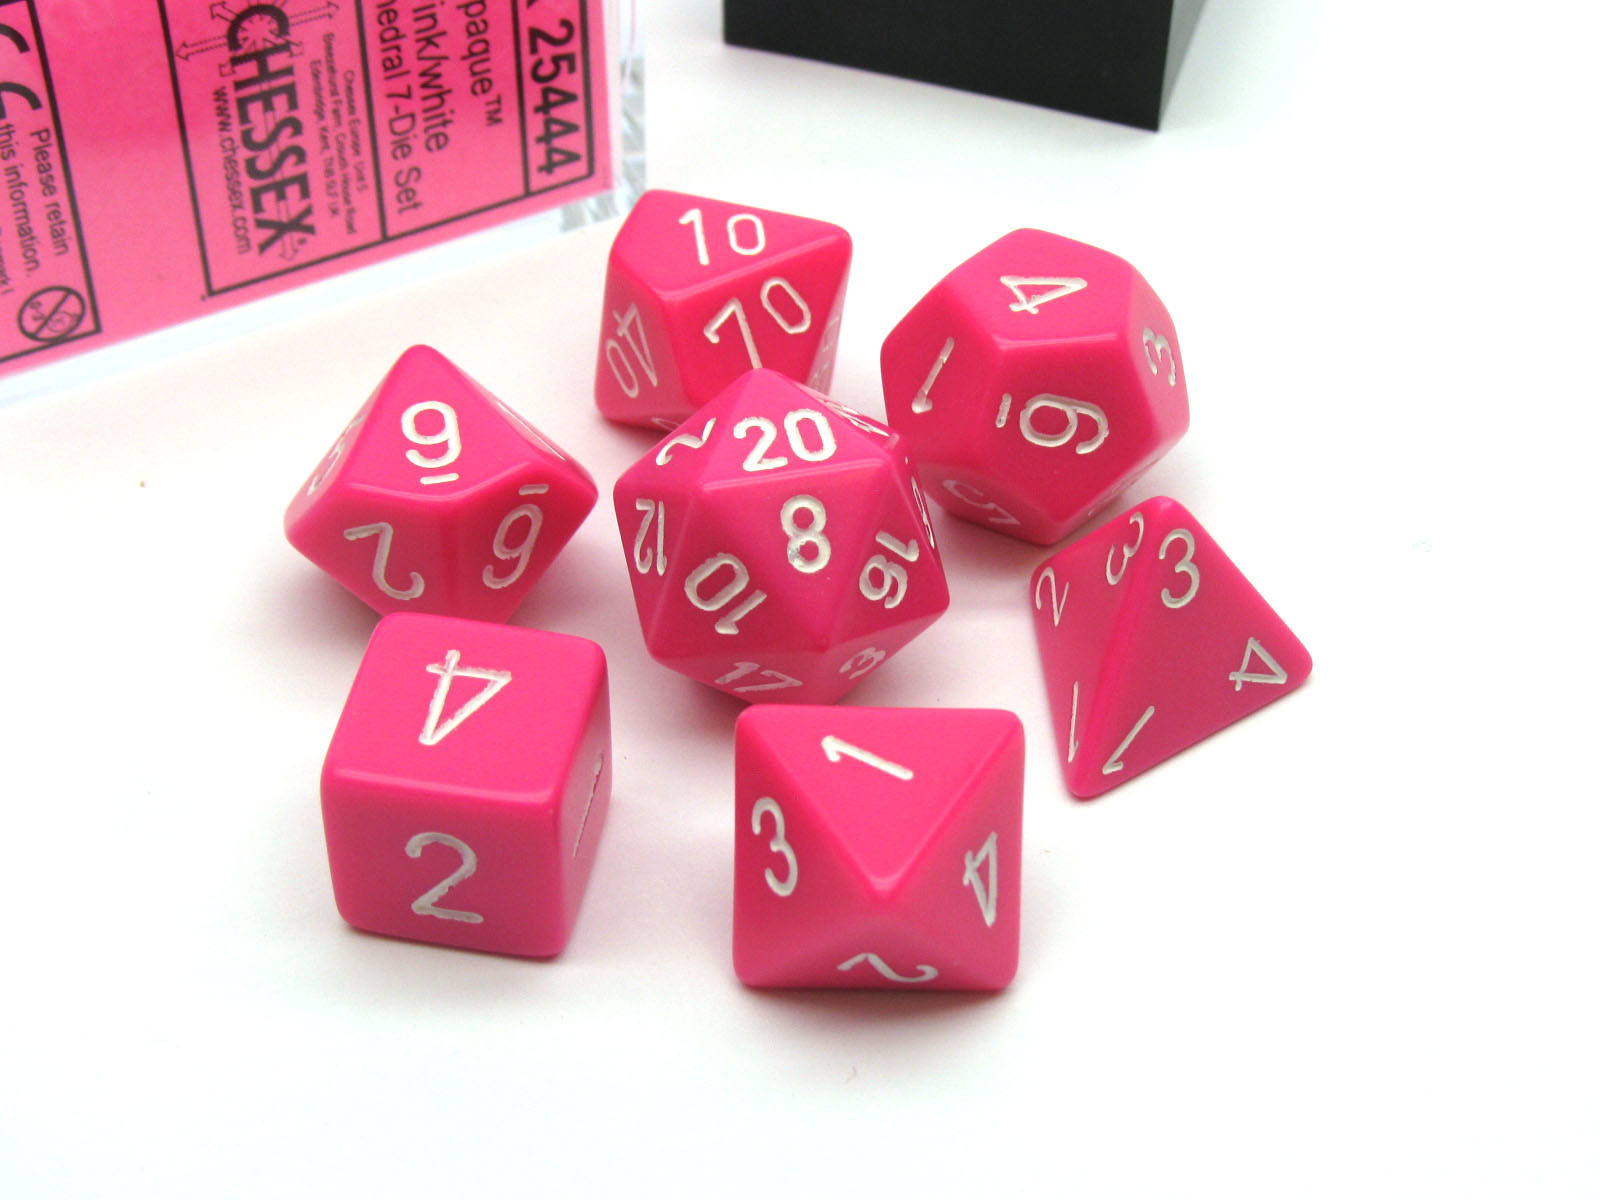 Chessex: Opaque Pink With White Sets